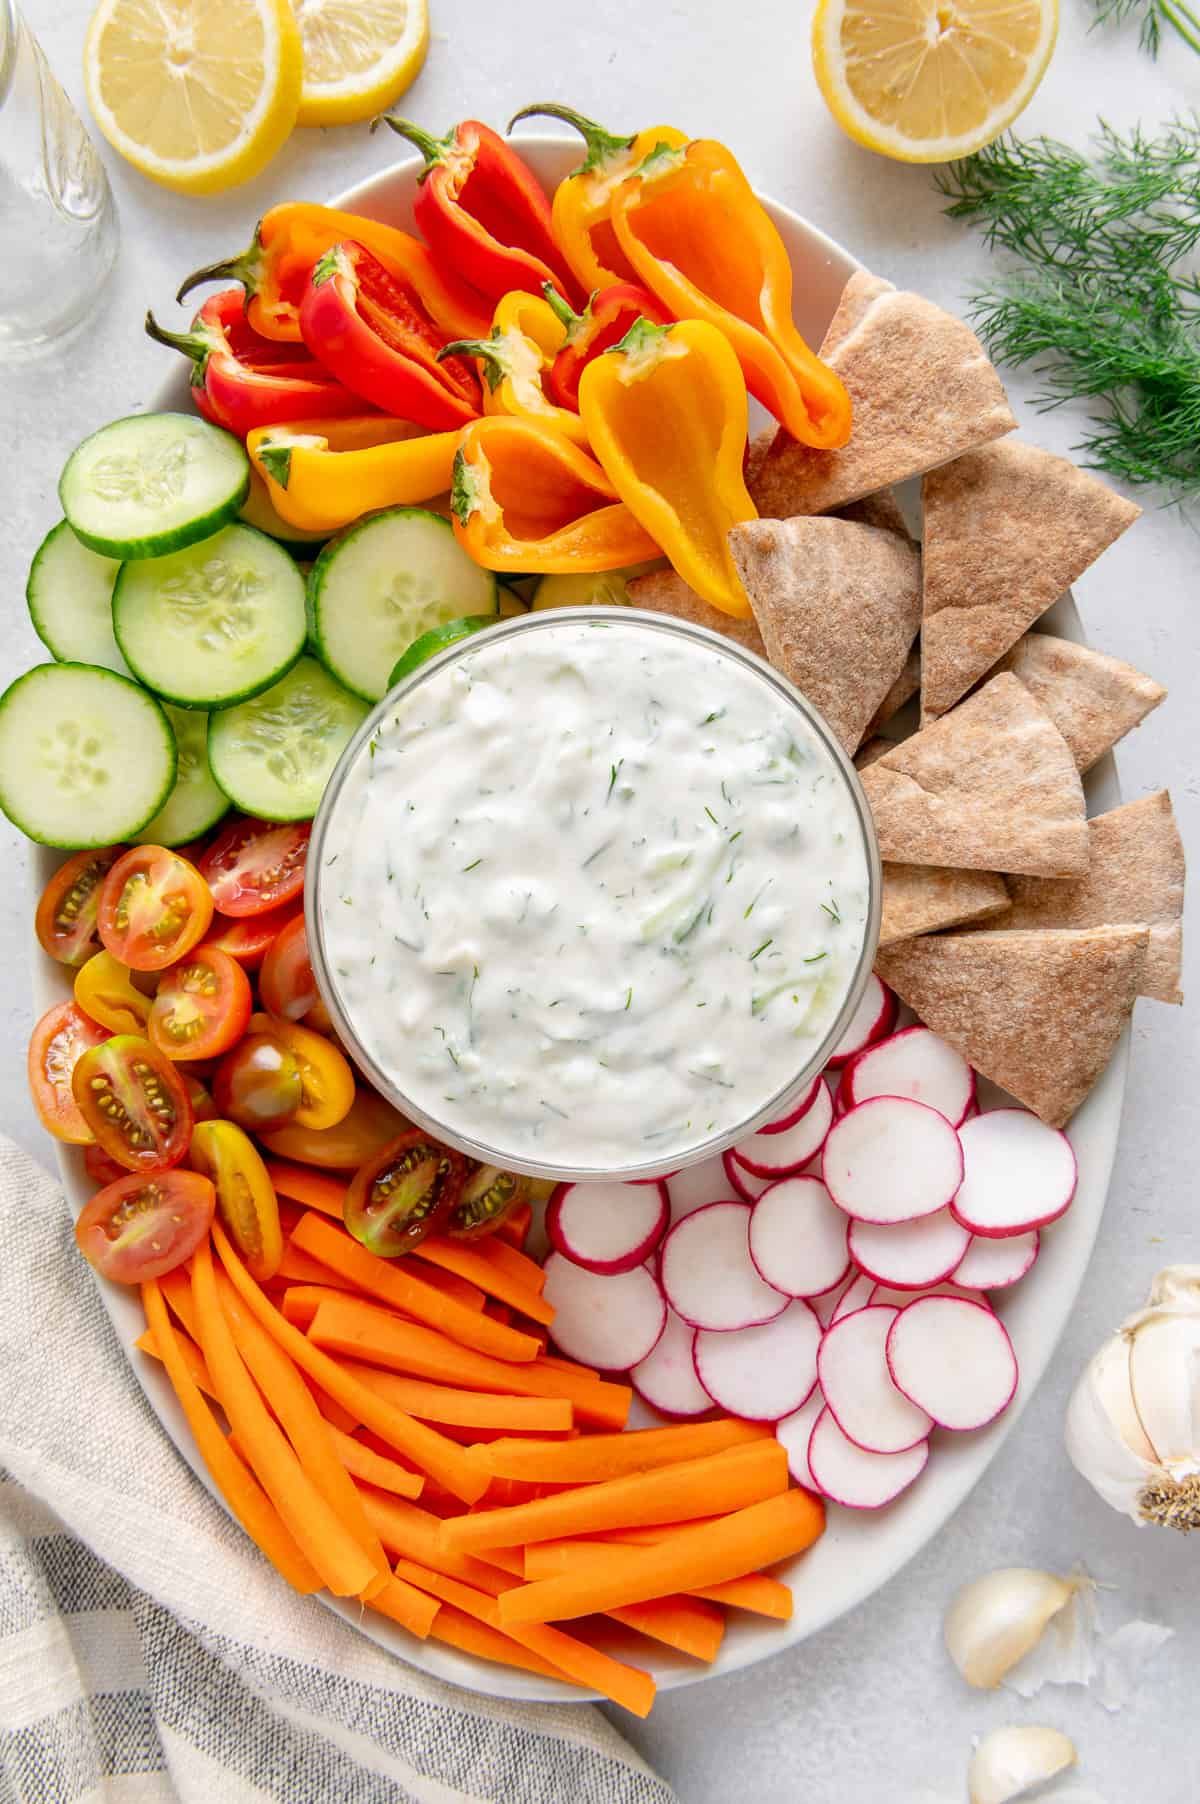 A serving platter with veggies and pita wedges served with a bowl of vegan tzatziki sauce.